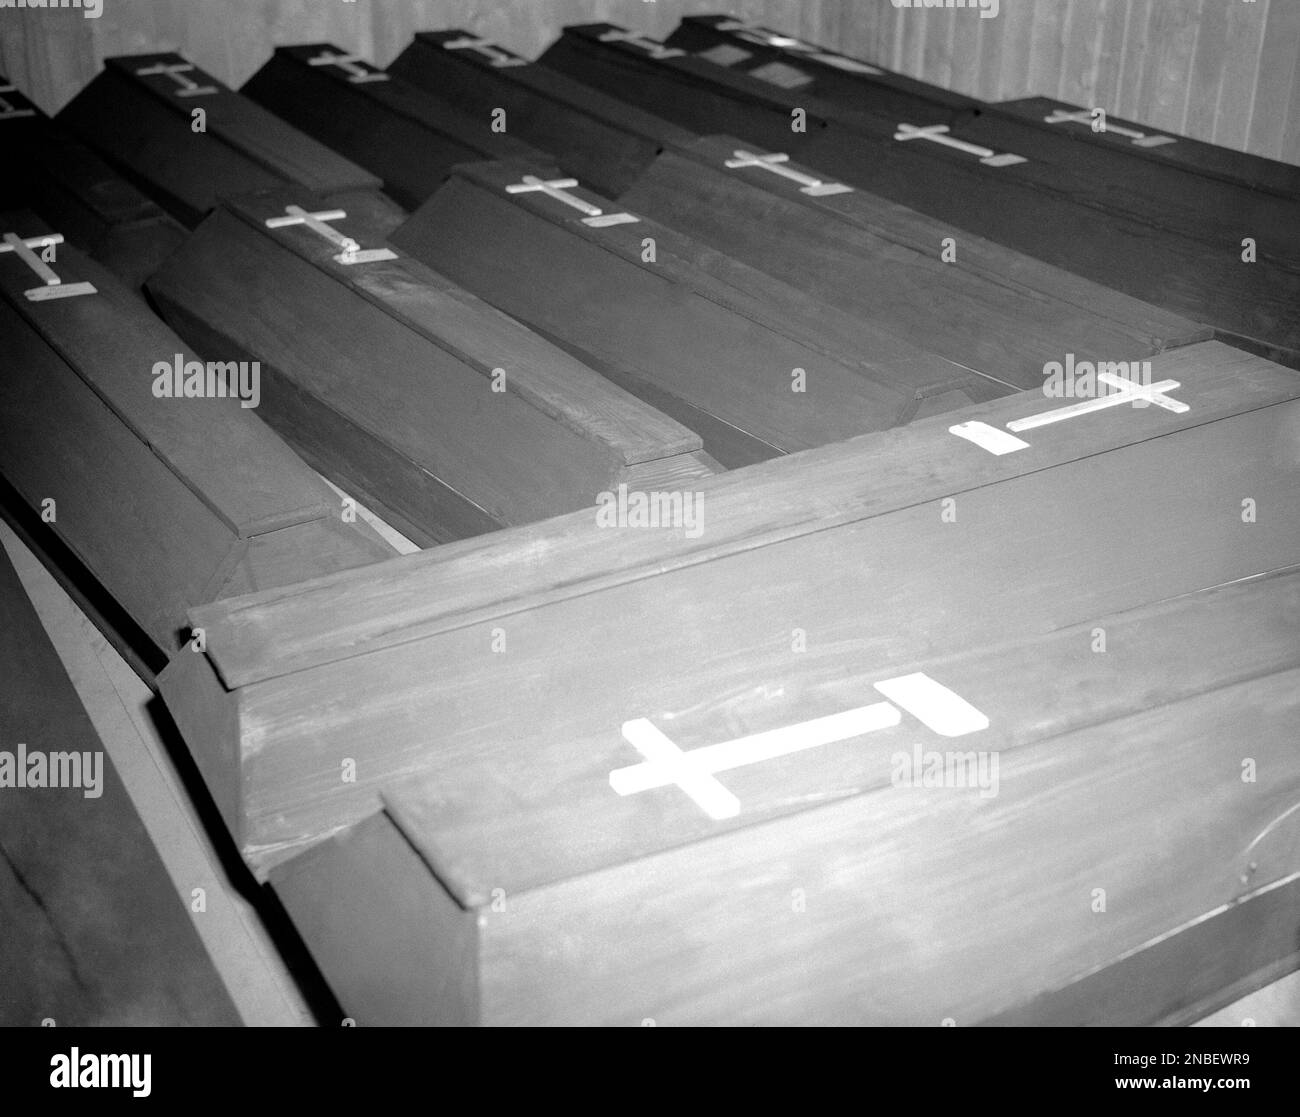 These coffins contain bodies of Nazis executed at Landsberg, Germany on May 28, 1946, in the first day of a two-day mass execution of 28 persons convicted last December of killing thousands of innocent victims by medical experiments, unleashing of hungry dogs, sadistic tortures, and malnutrition at Dachau concentration camp. Fourteen executions were carried out each day. (AP Photo/Robert Clover) Banque D'Images